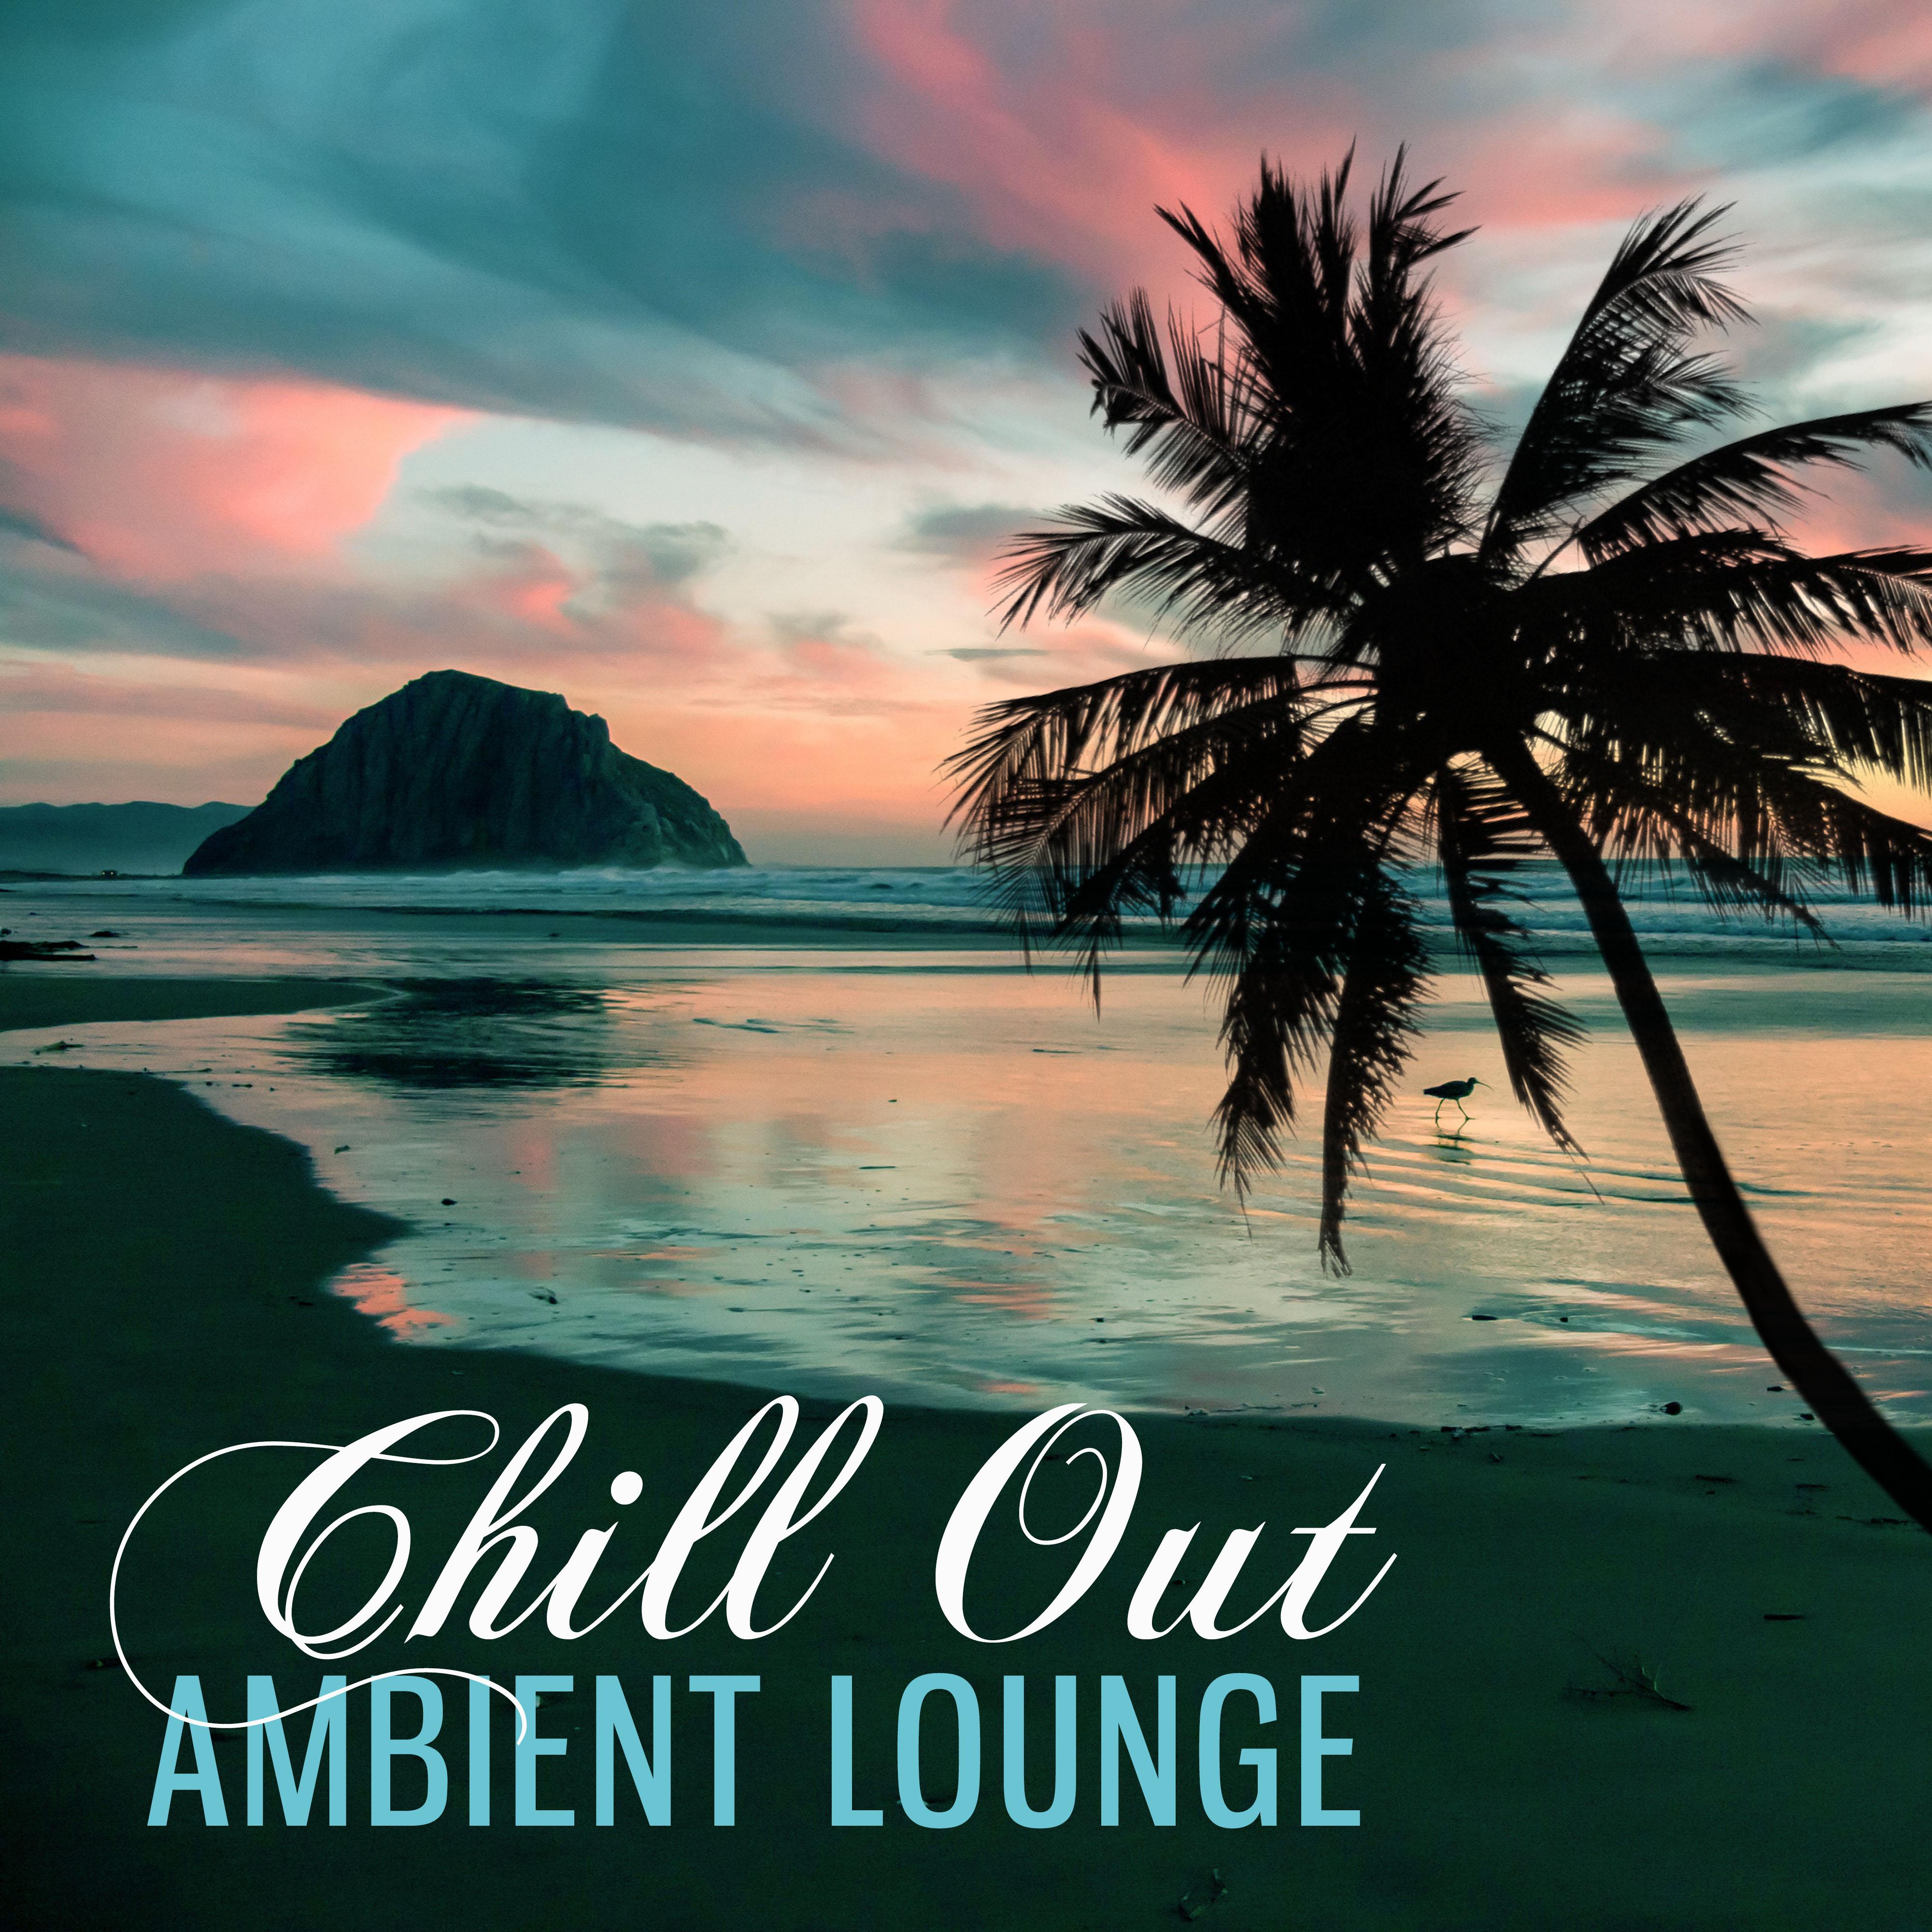 Chill Out Ambient Lounge  Calm Your Spirit, Chillout Music to Rest, Soft Sounds for Relaxation, Sweet Chill Music